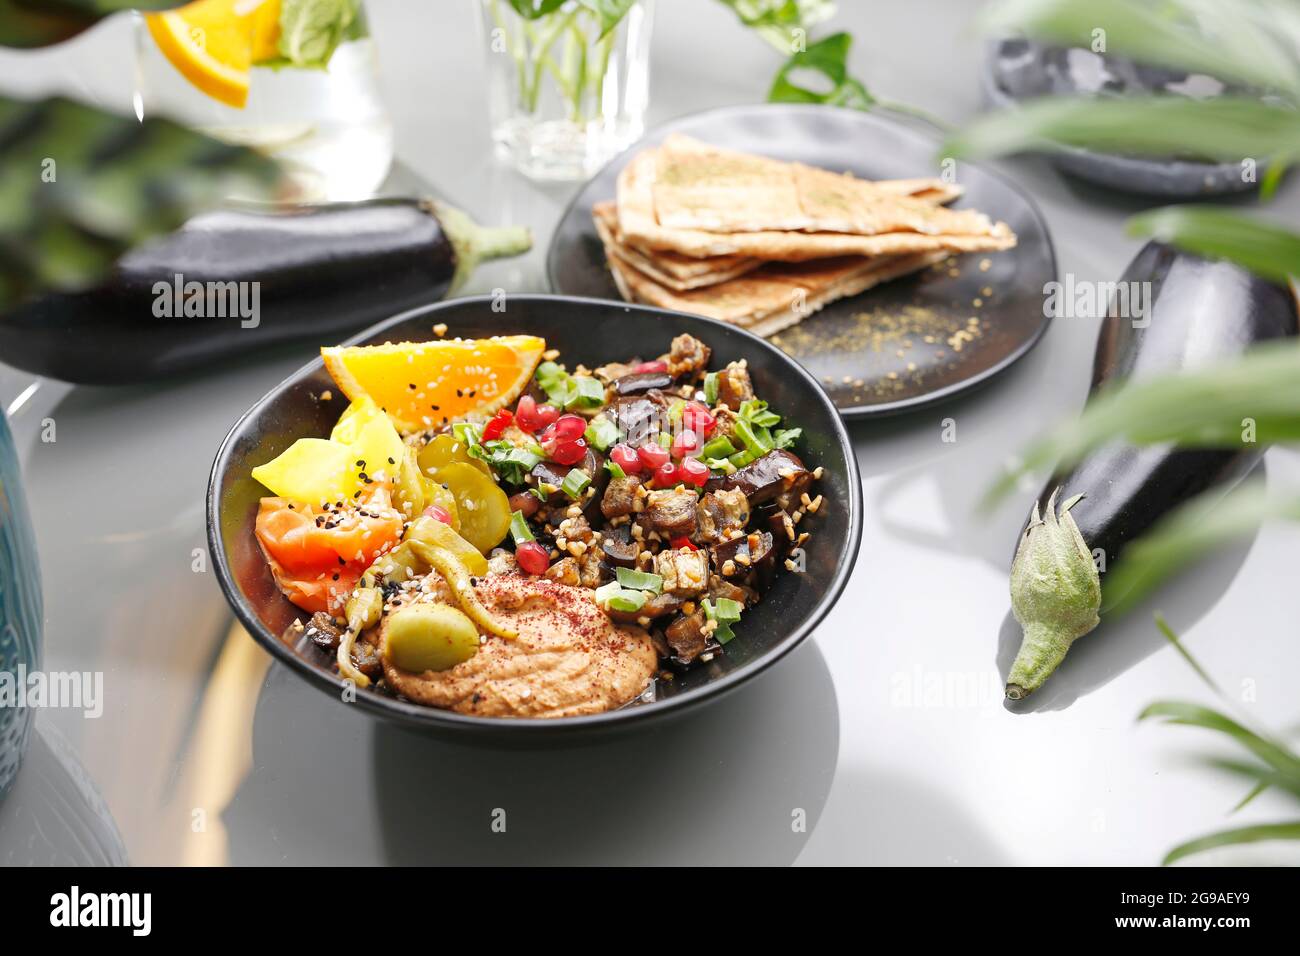 Humus with eggplant and olive salad. Vegetarian cooking. A colorful appetizing dish. Culinary photography, food styling. Stock Photo